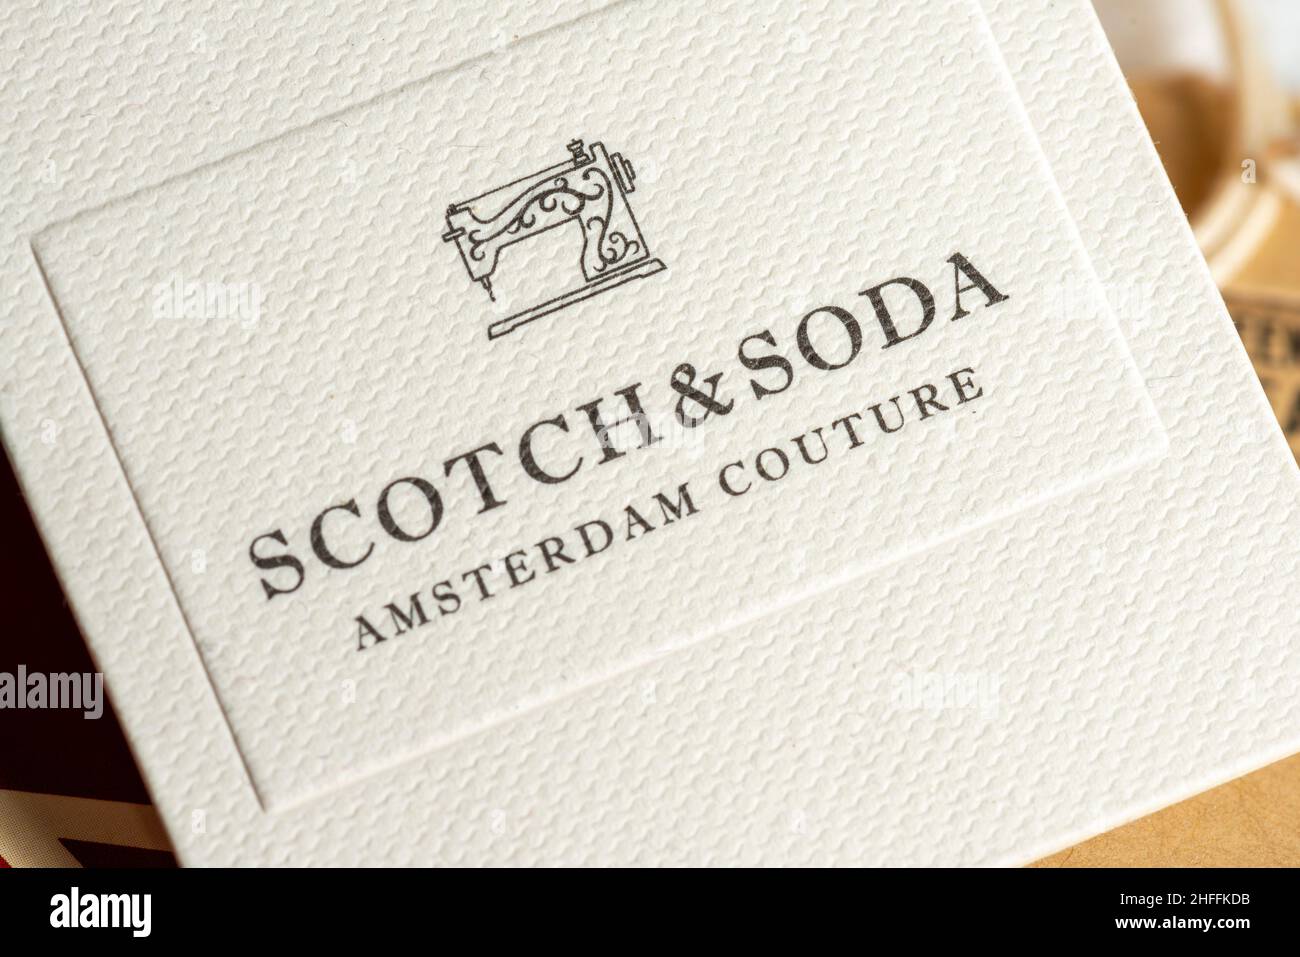 Label for Scotch and Soda Amsterdam couture garments Stock Photo